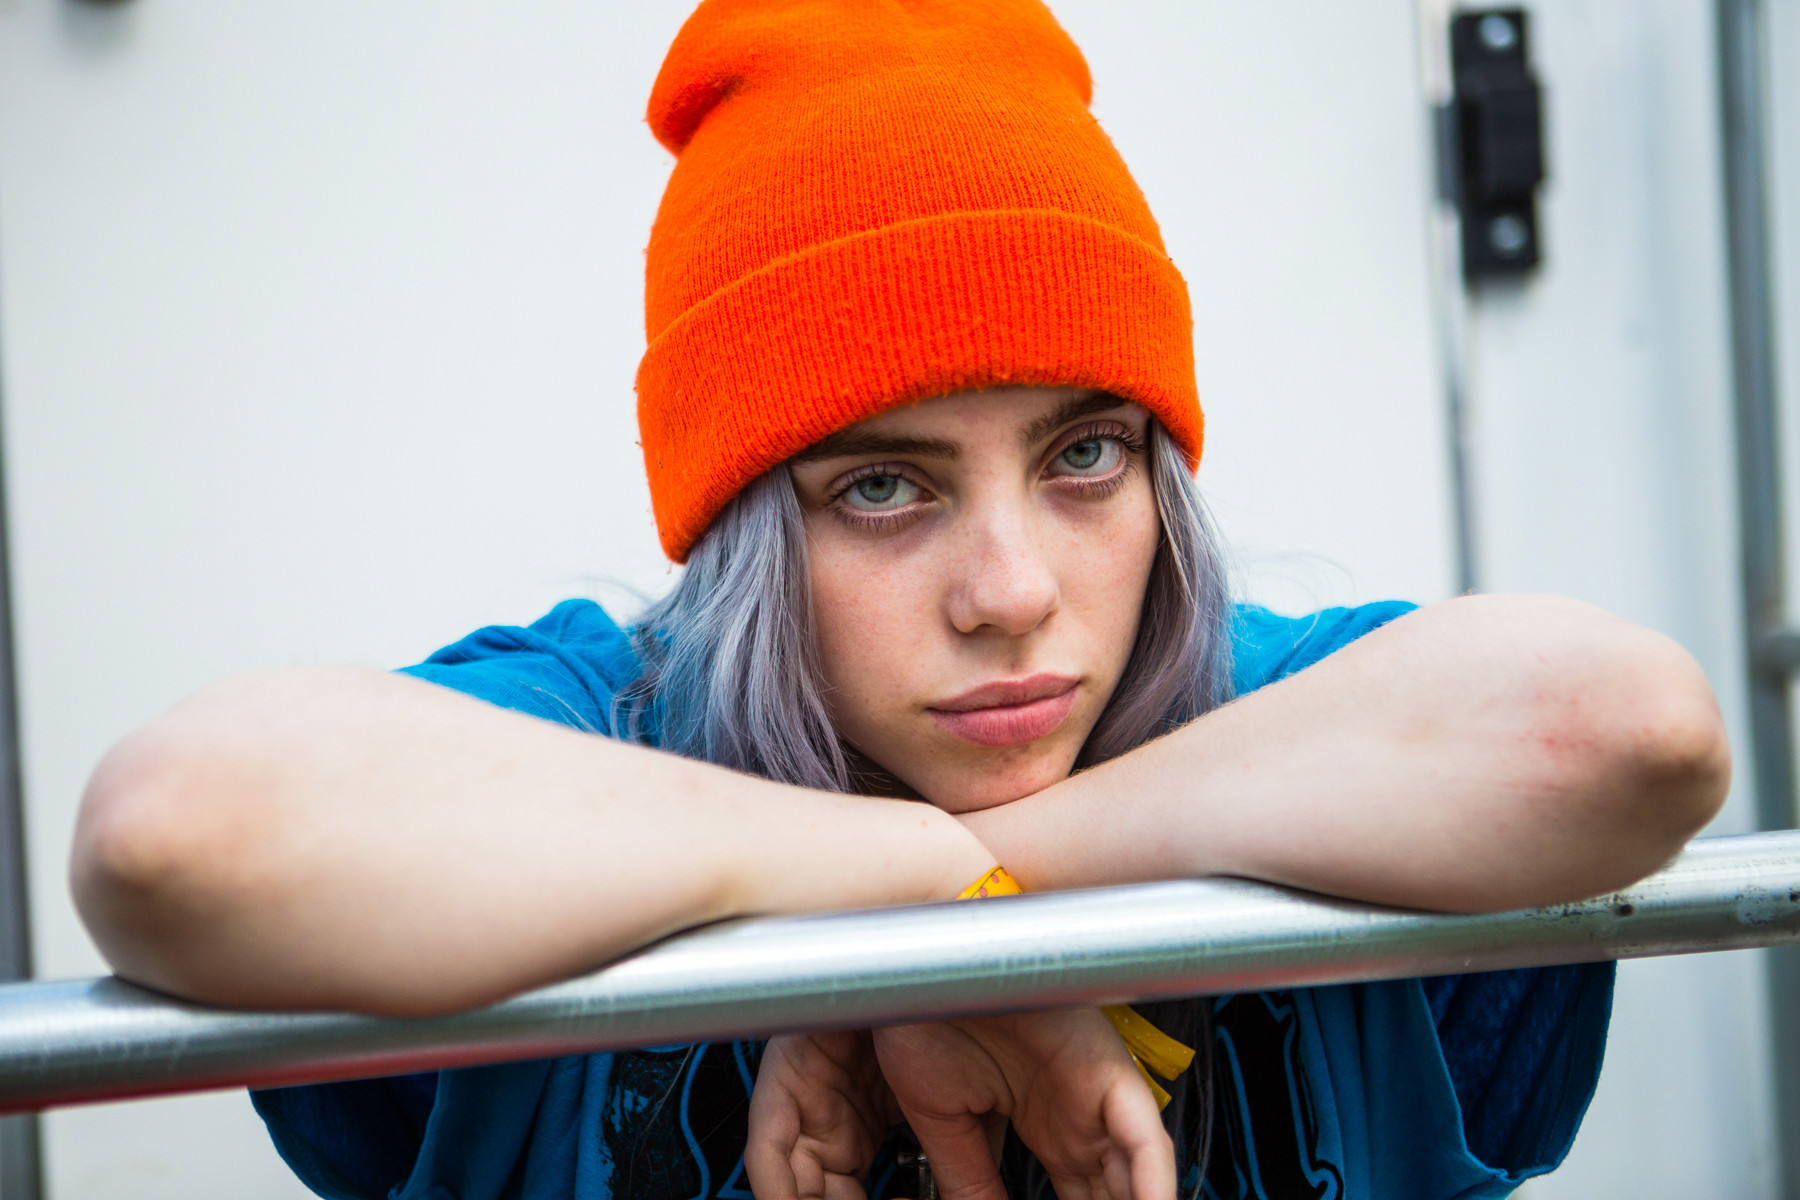 60+ Billie Eilish Photos and High-Res Pictures: Age, Family, Bio